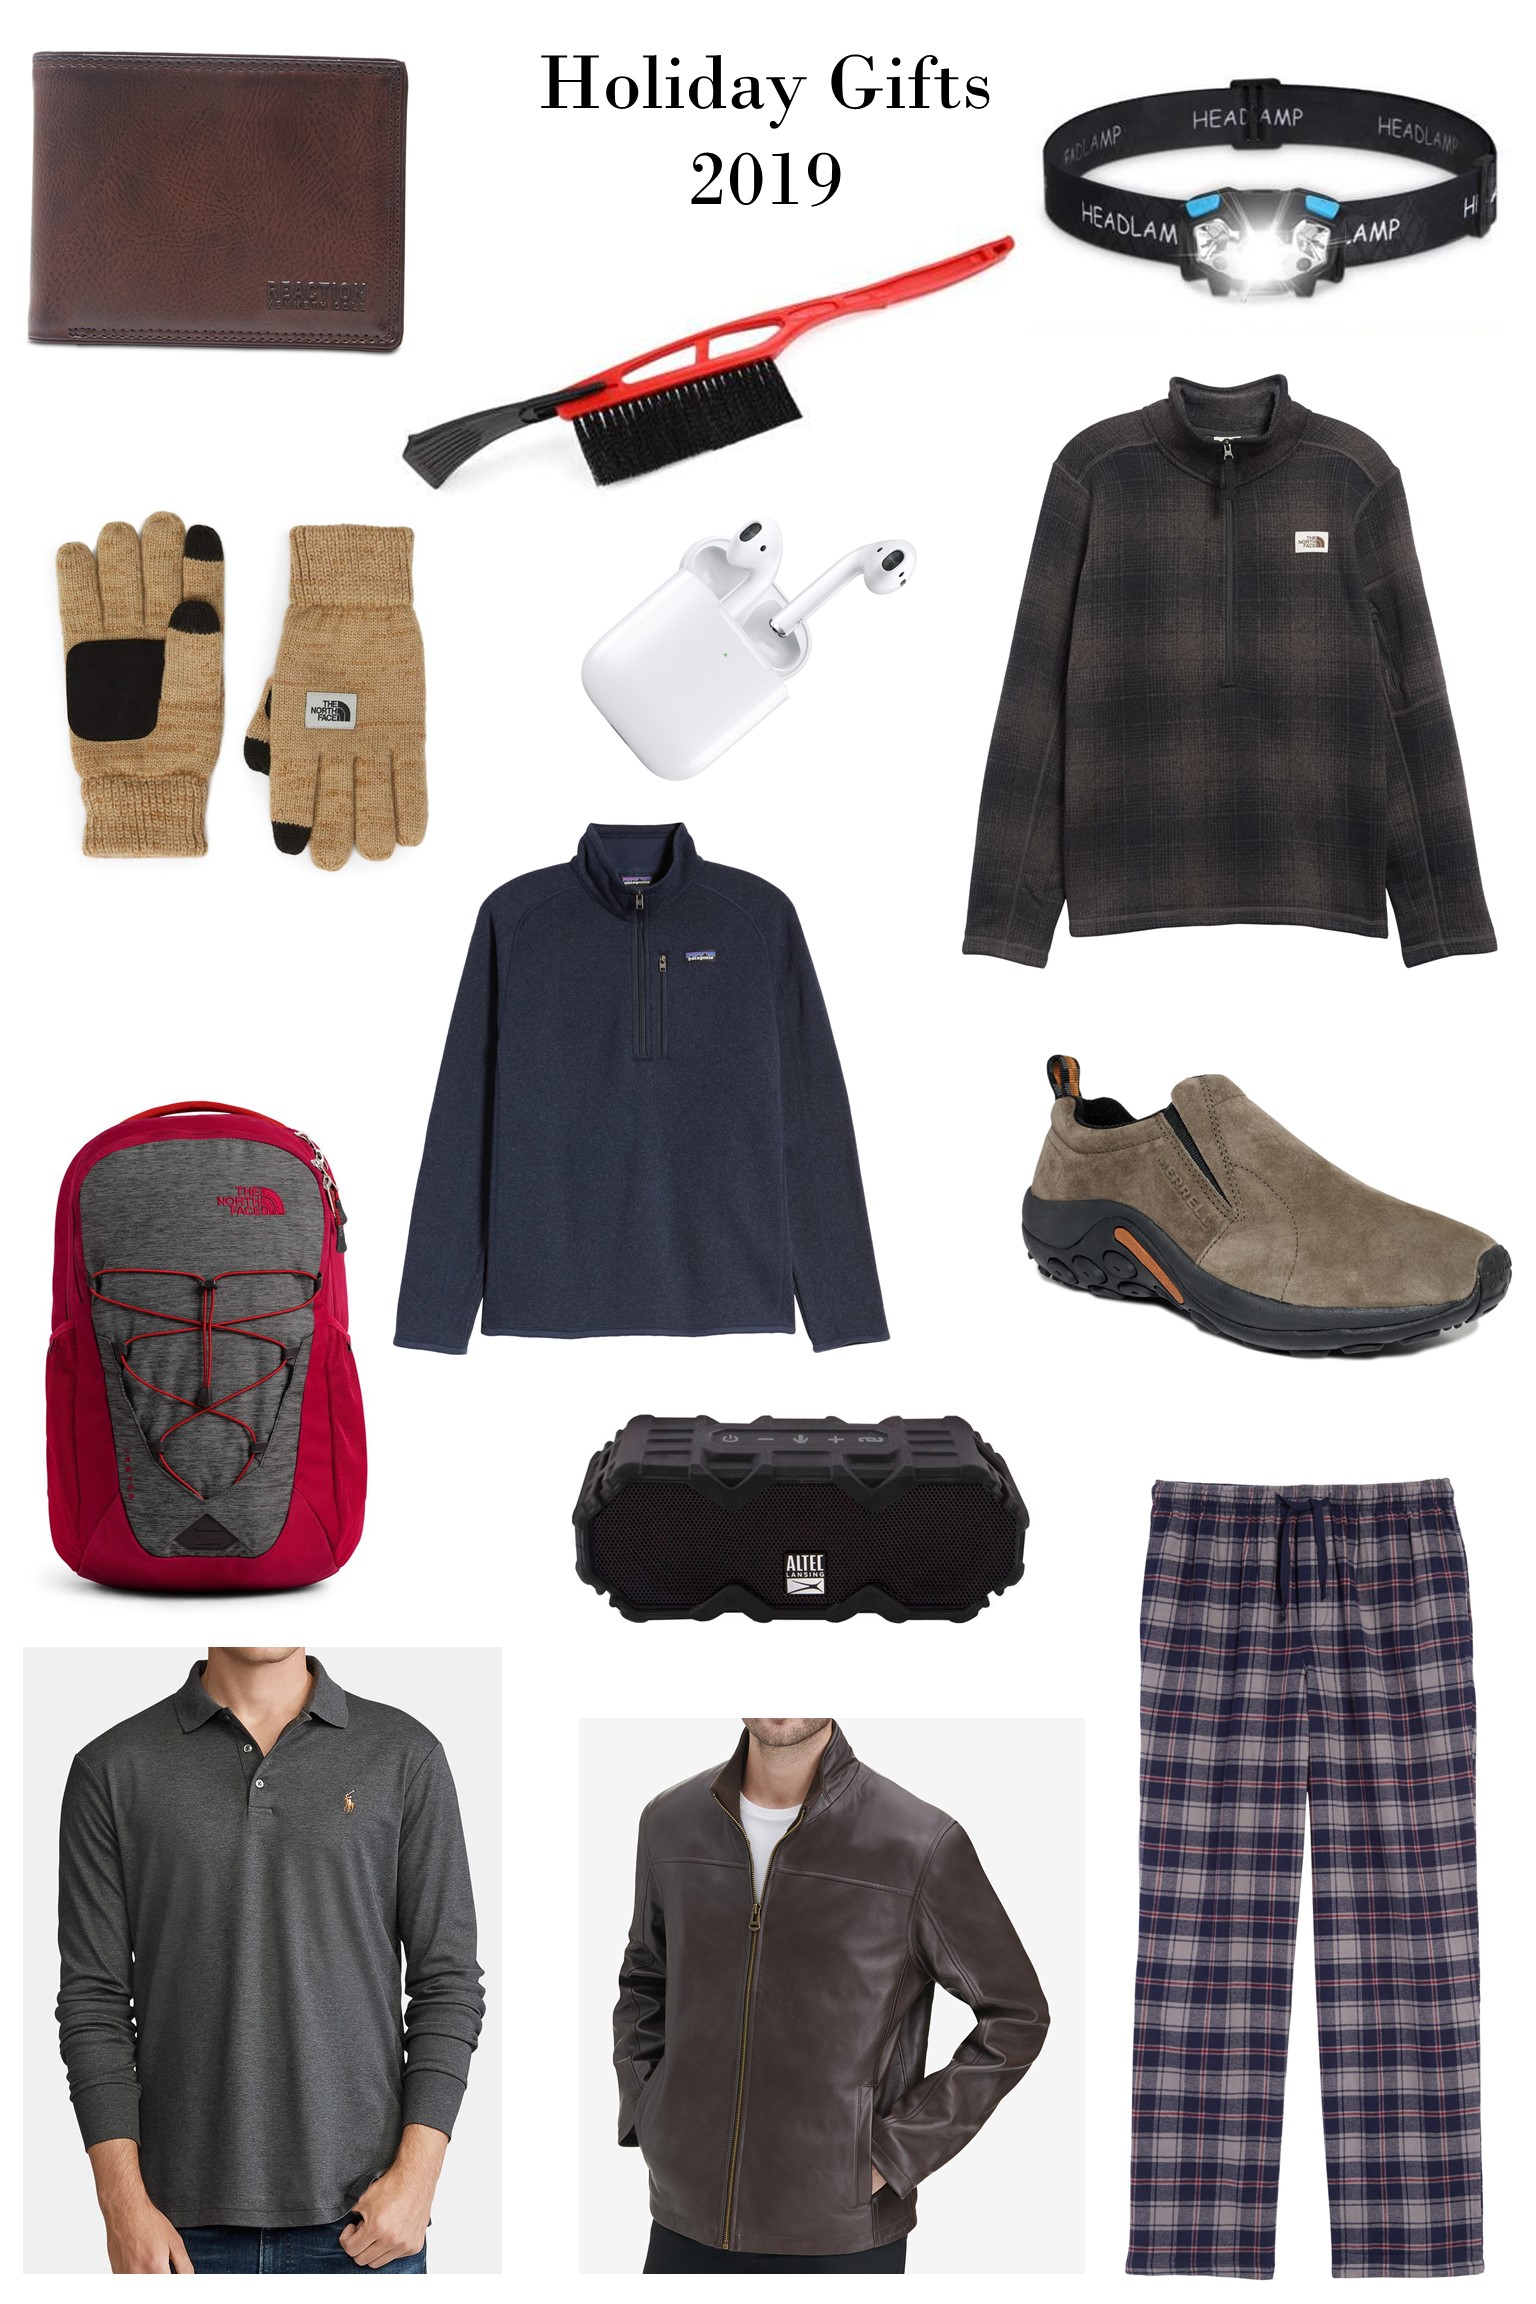 Holiday Gift Guide for Gentlemen